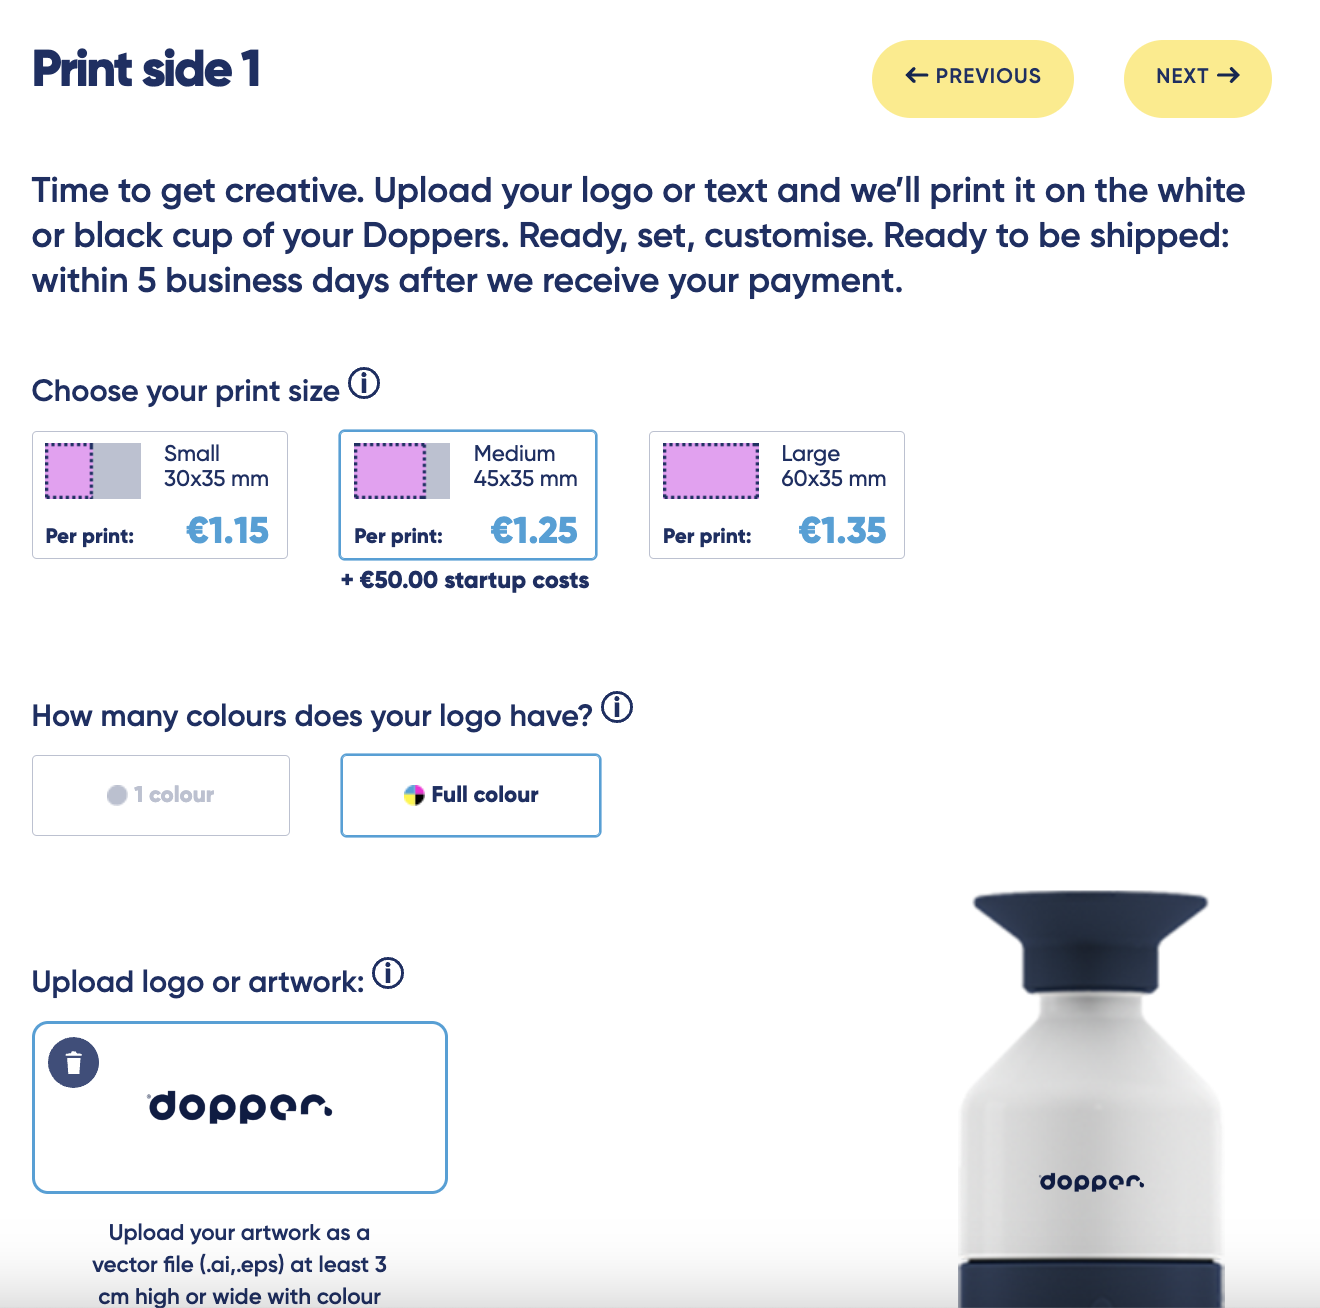 Screenshot of print side 1 page in the B2B customiser tool by Dopper